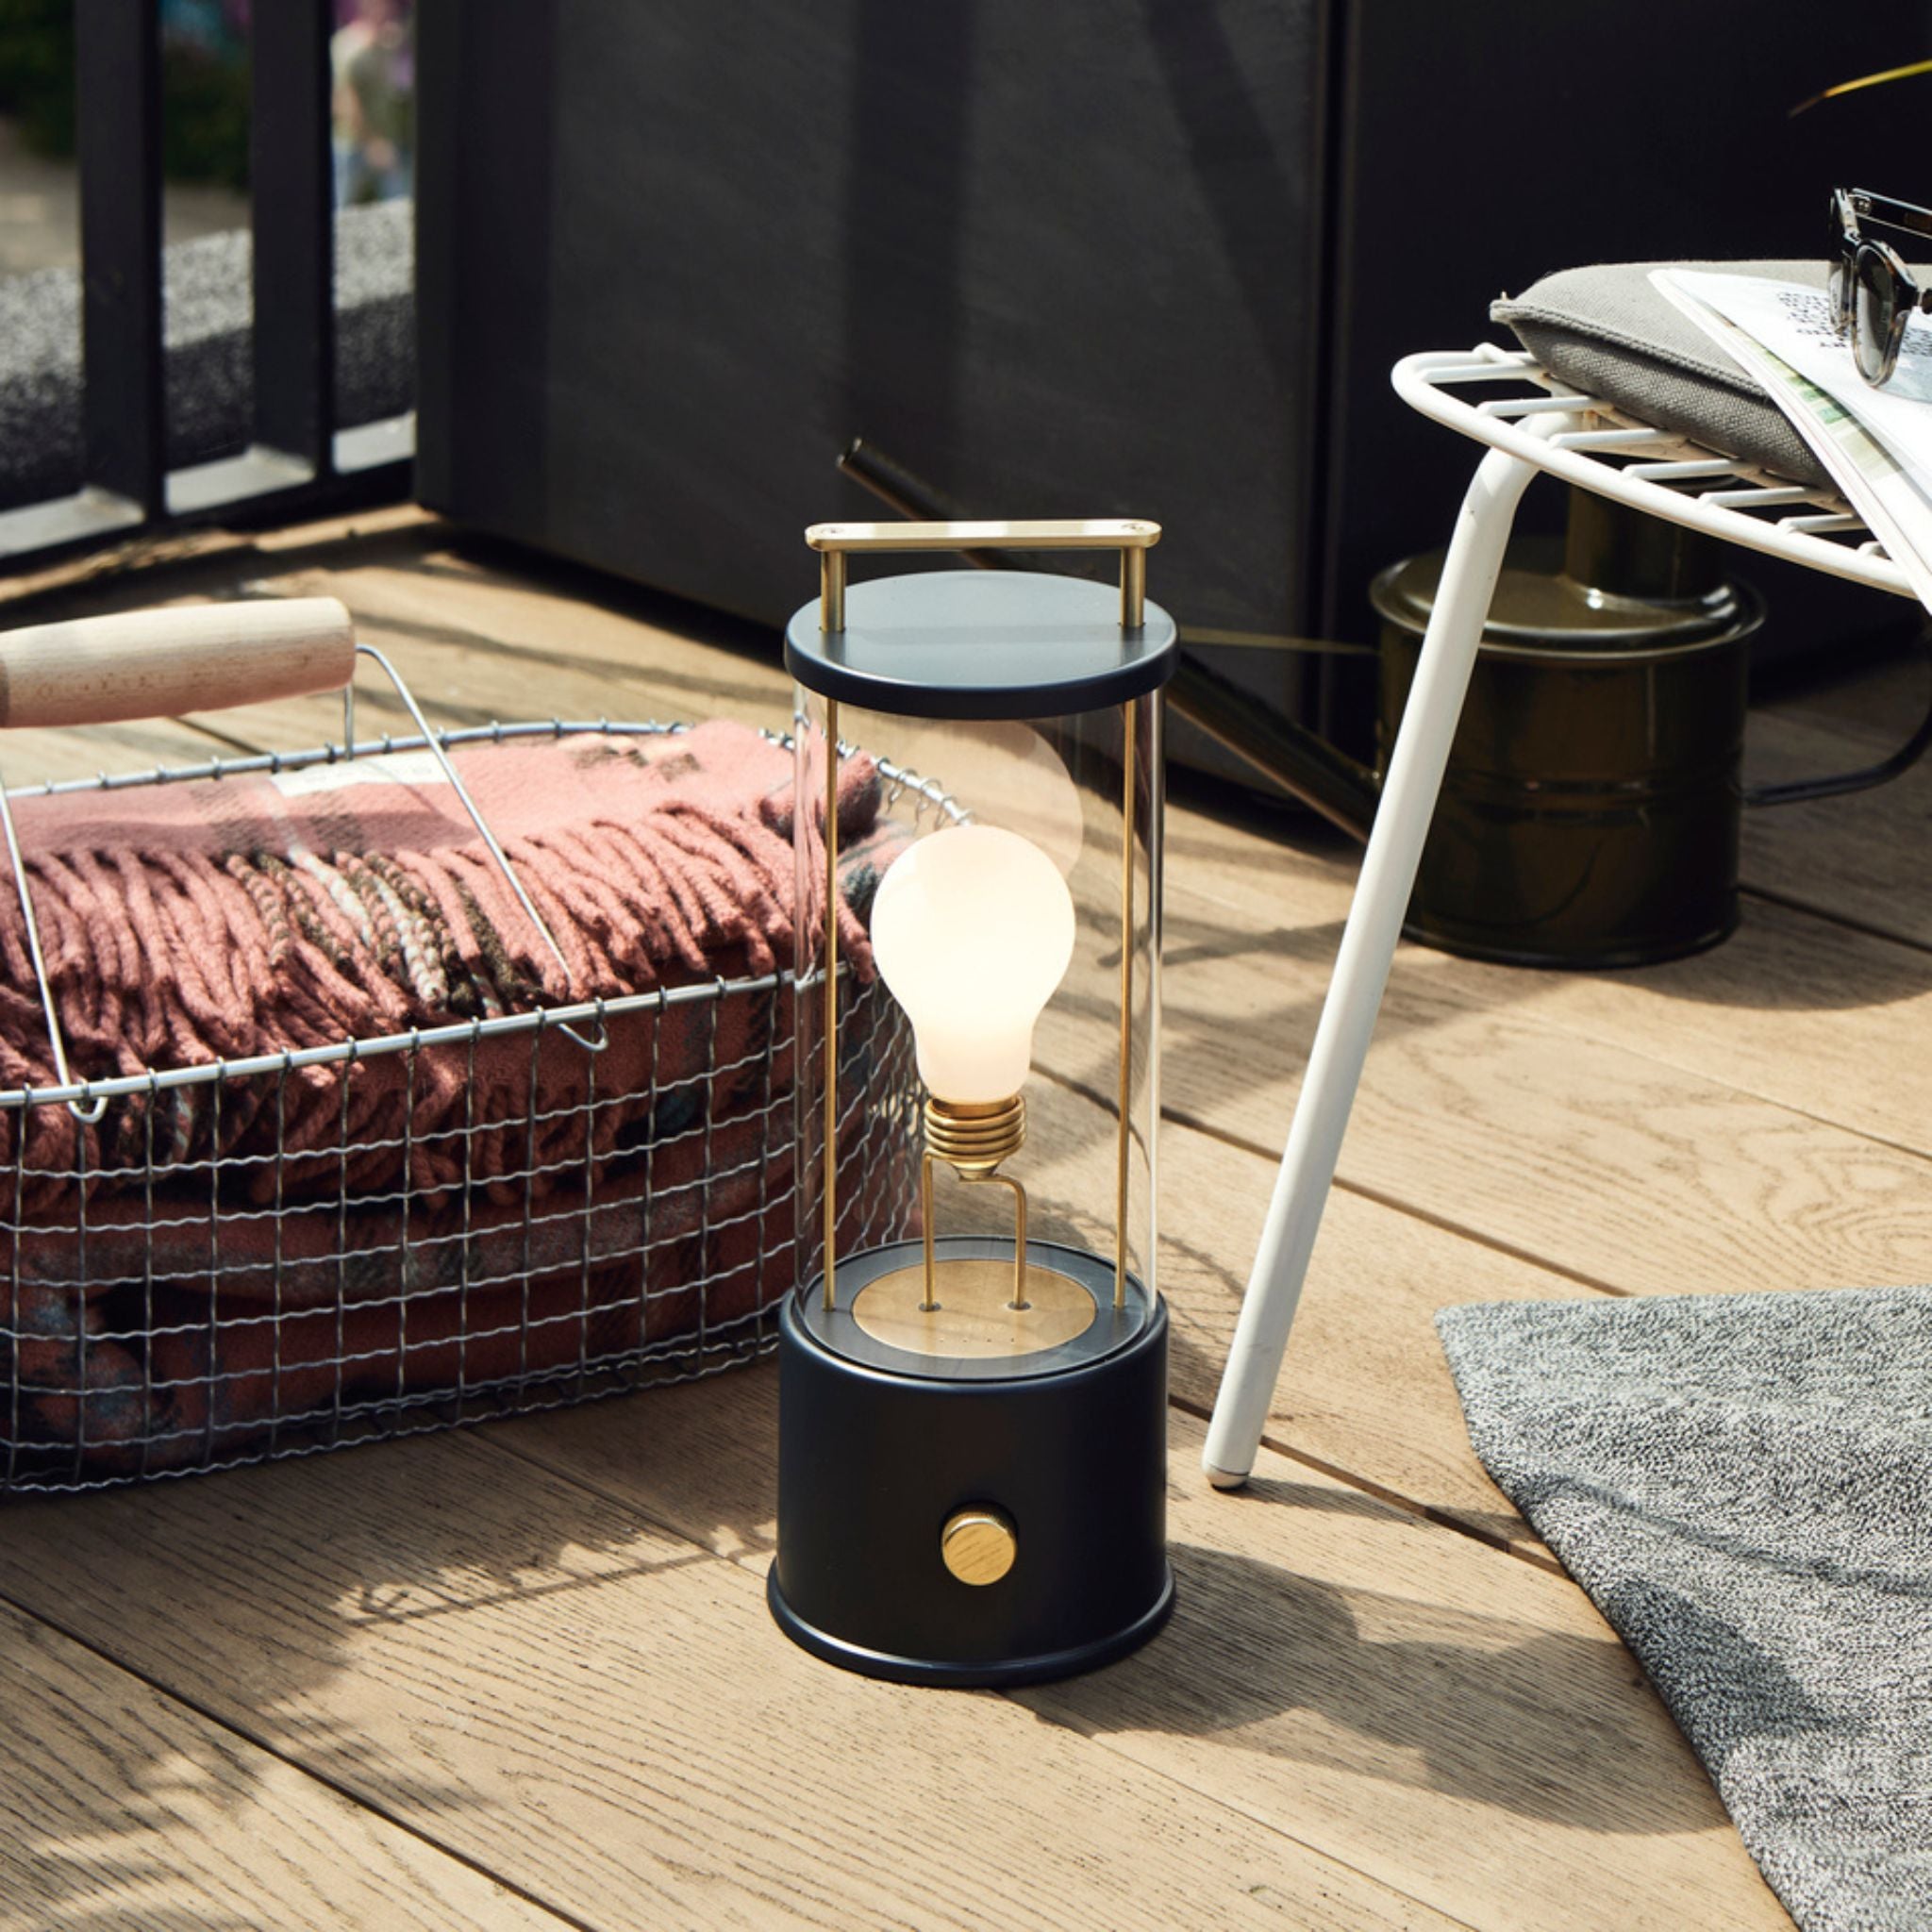 The Muse Portable Lamp